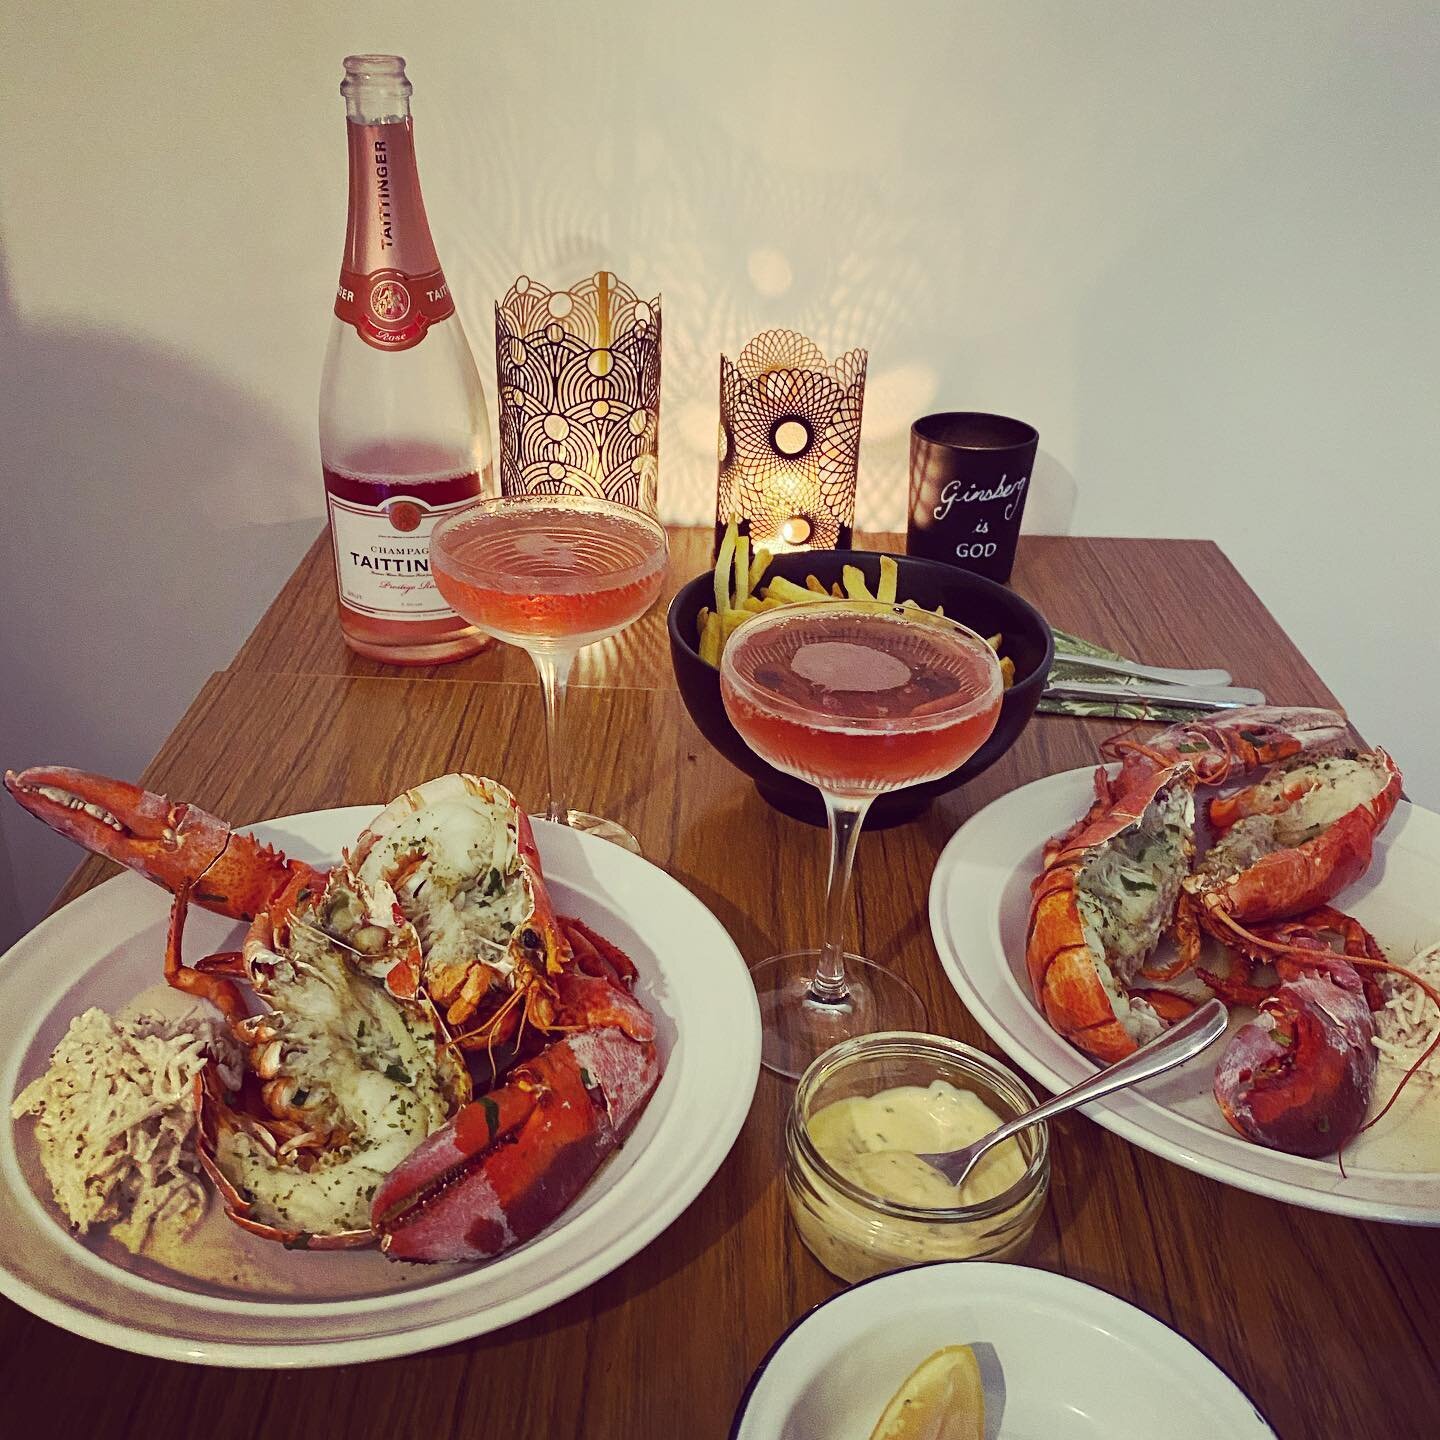 Valentines Lobster frites &amp; pink bubbles. Can&rsquo;t wait to go to an actual real restaurant, this&rsquo;l do for now. #valentines #lobster #eatathome